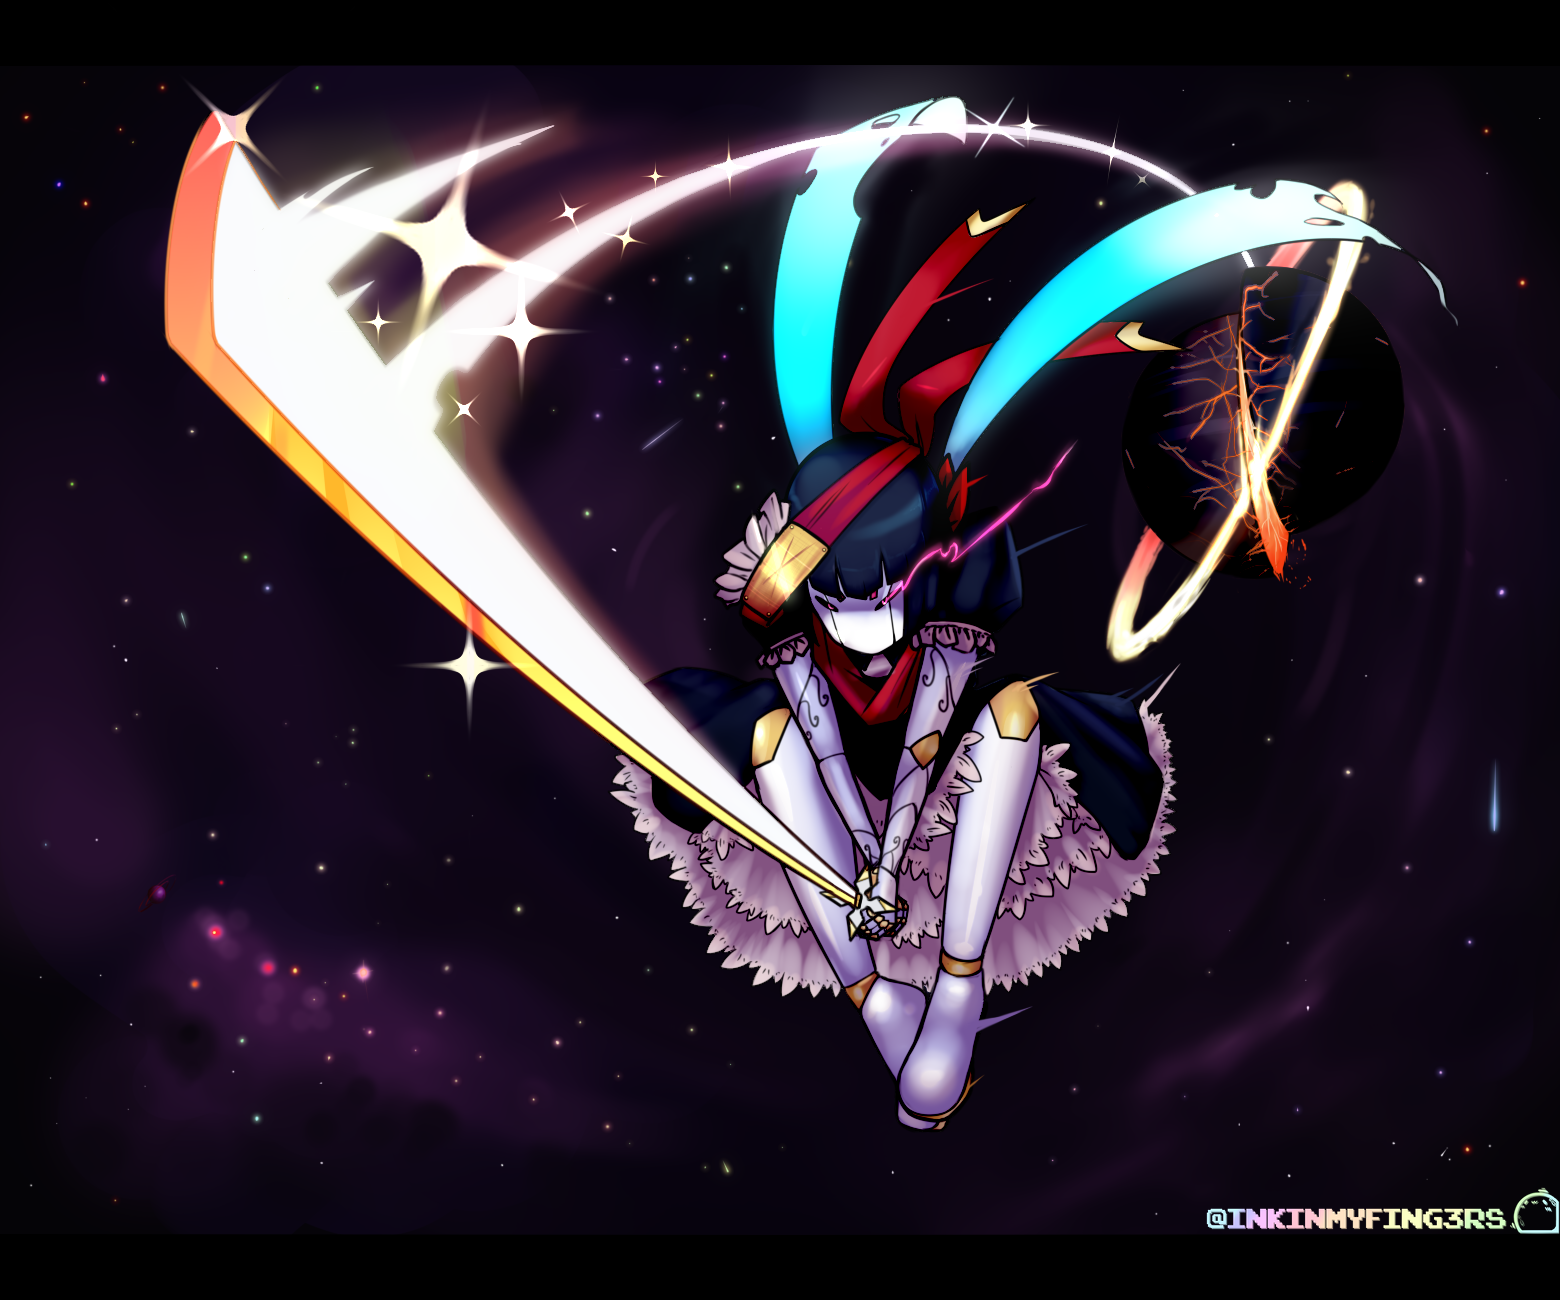 SUPER SPACE ROBOT MAID NINJA by SlimeLord 